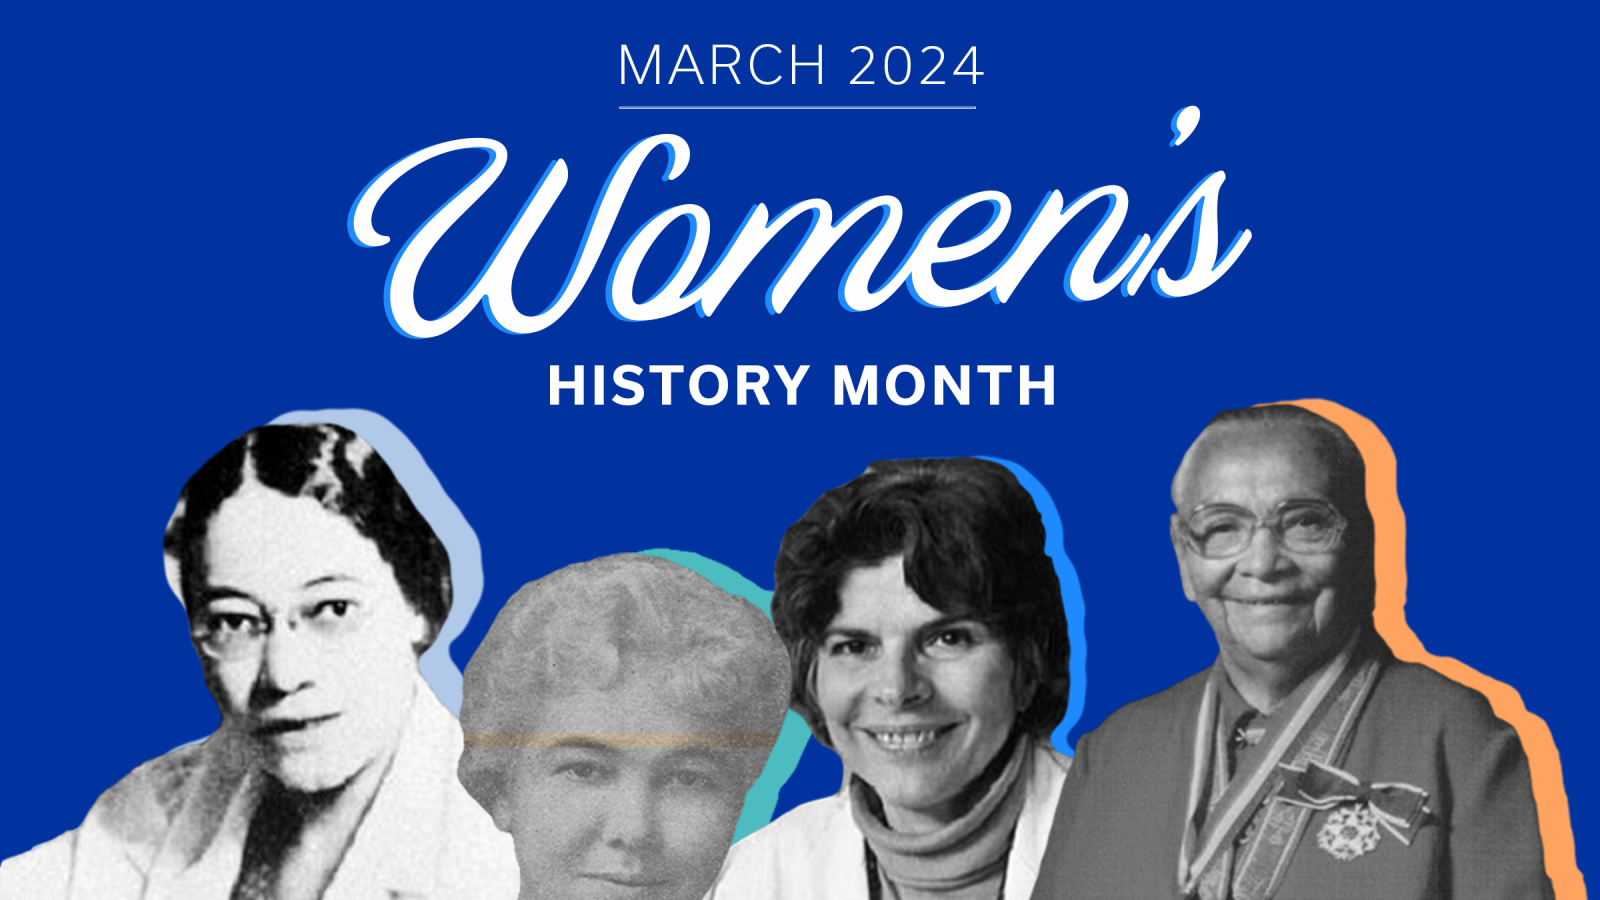 Women's History Month 20222: 10 women medical pioneers who revolutionized  healthcare